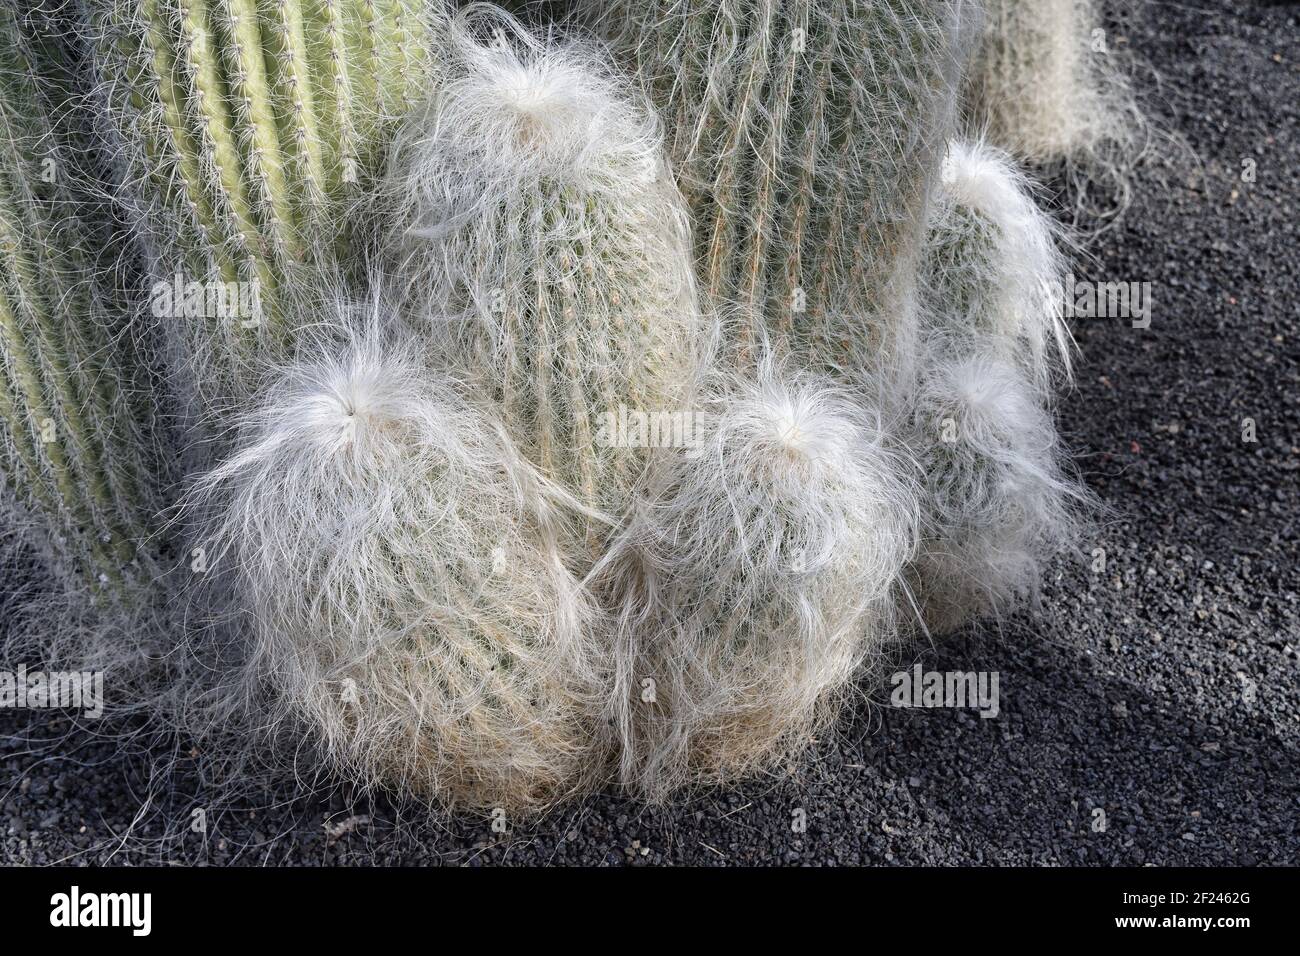 Cephalocereus senelis Bunny Cactus, also called Old Man Cactus, Old Man of Mexico. This species is native to Mexico Stock Photo